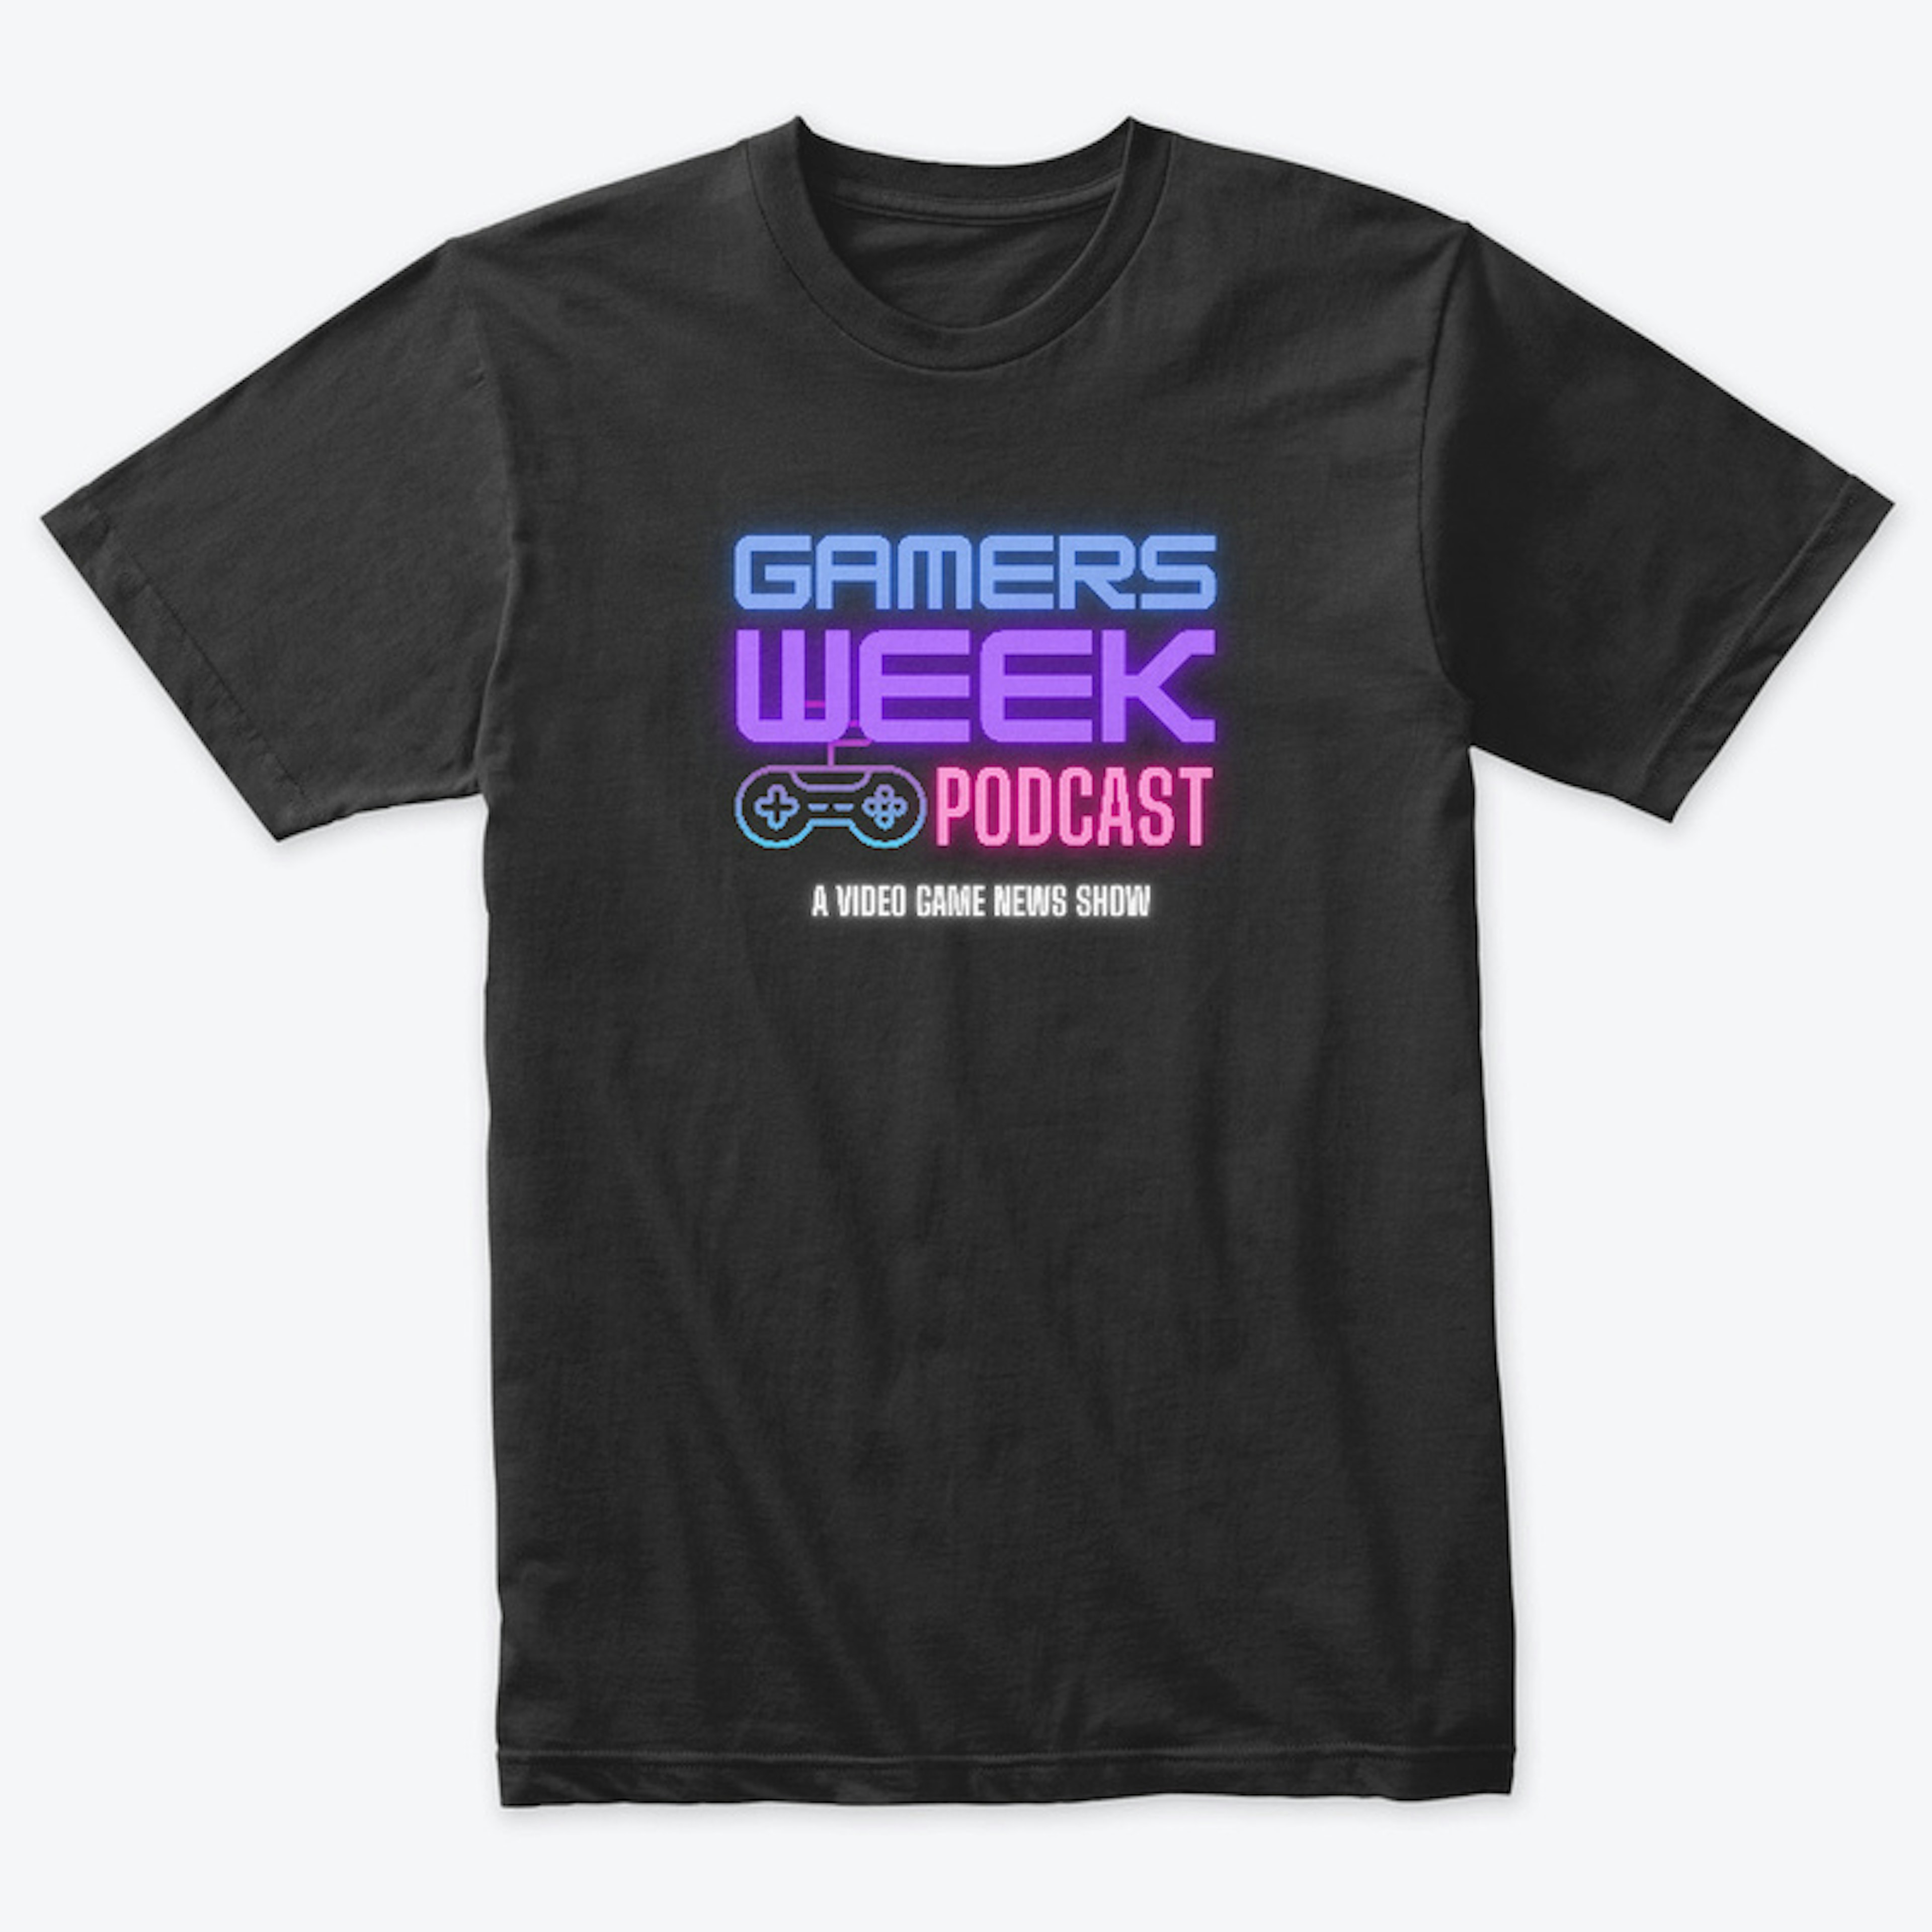 Gamers Week Podcast T-Shirt